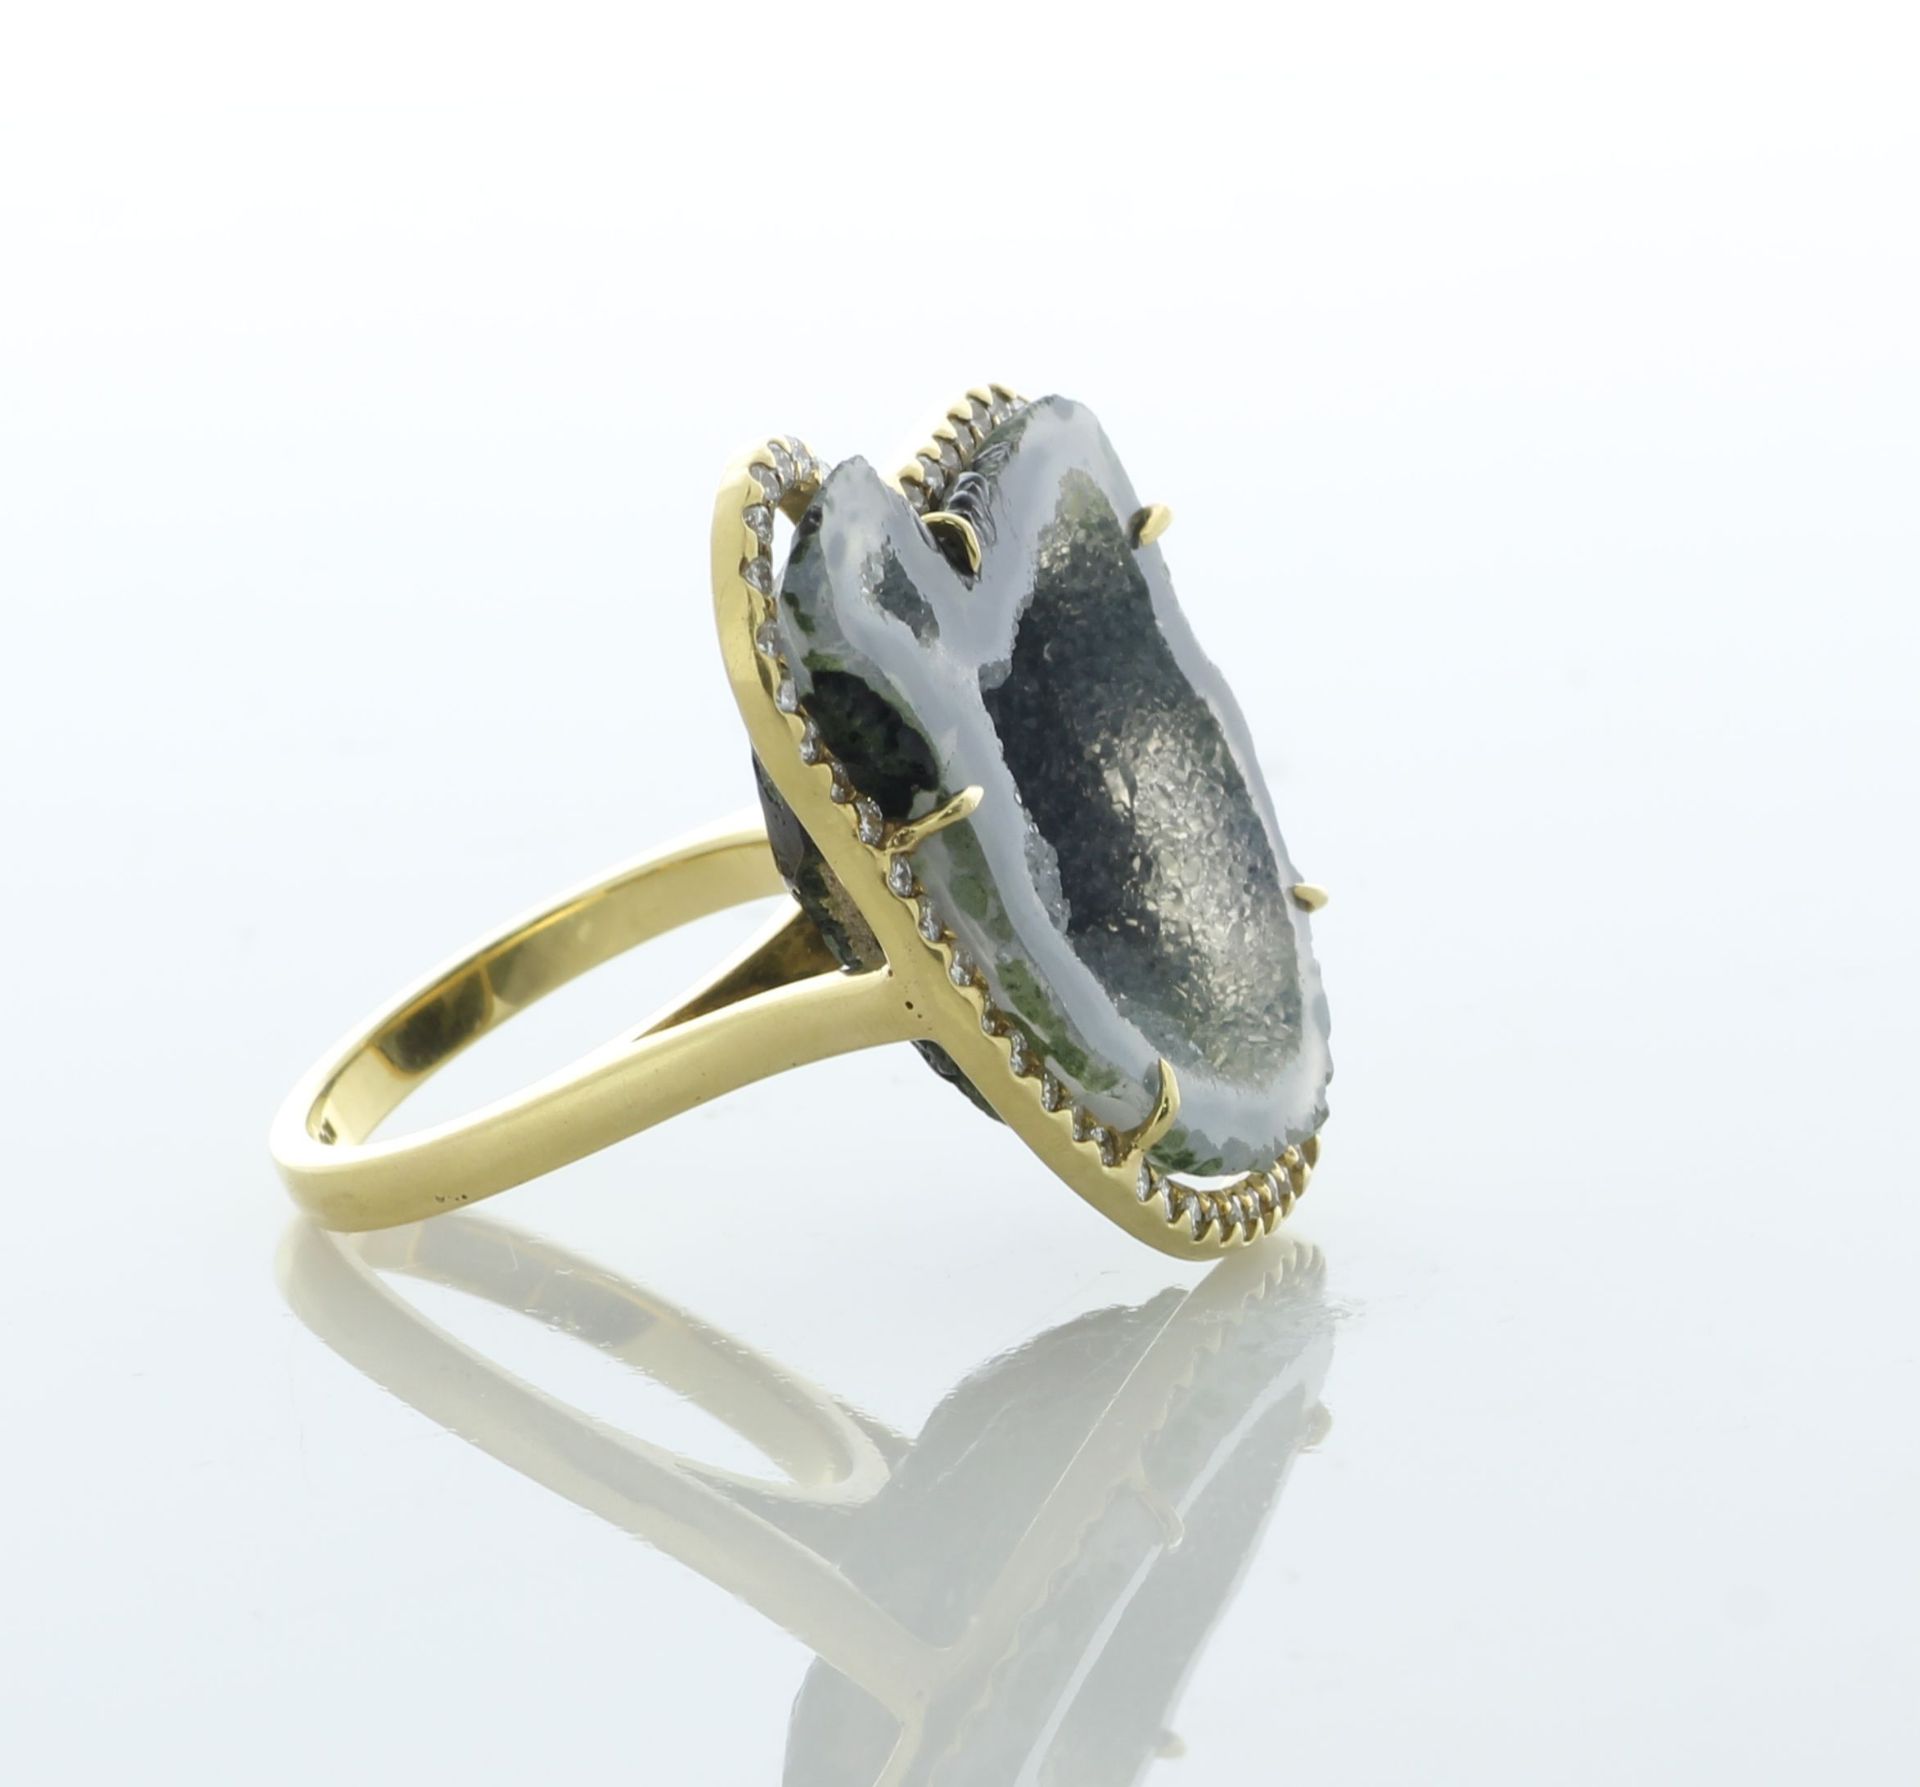 18ct Yellow Gold Diamond And Fossil Ring 0.60 Carats - Valued By AGI £7,560.00 - Image 2 of 5